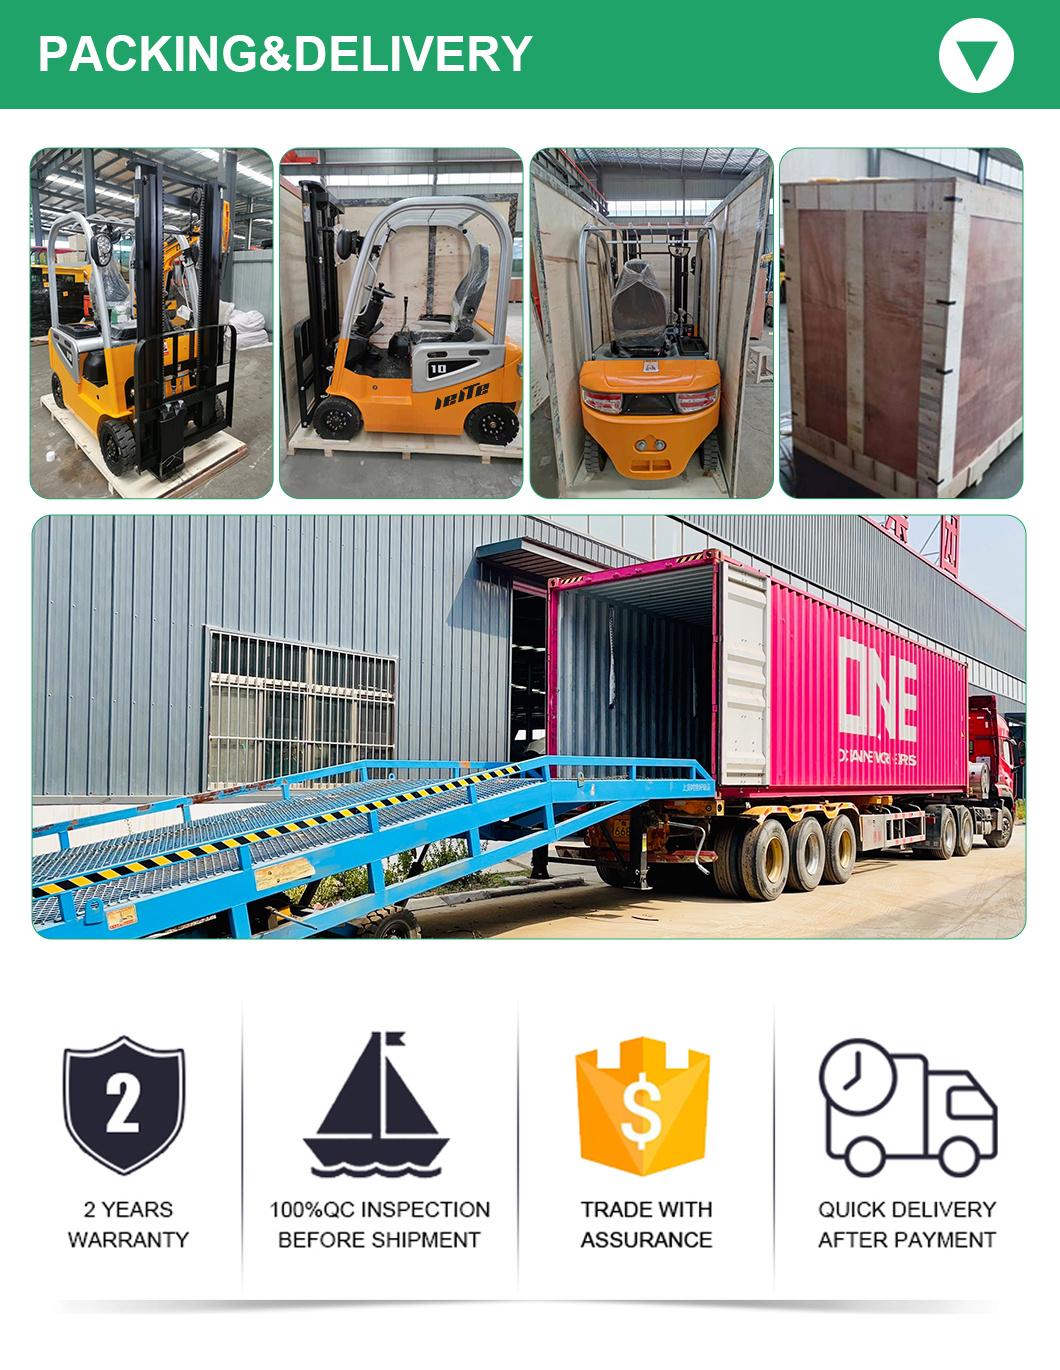 Small Cheap Price Mini Forklift for Warehouse 2 Ton Electric Forklift Electric Forklift for Sale Electric Forklift with Attachment